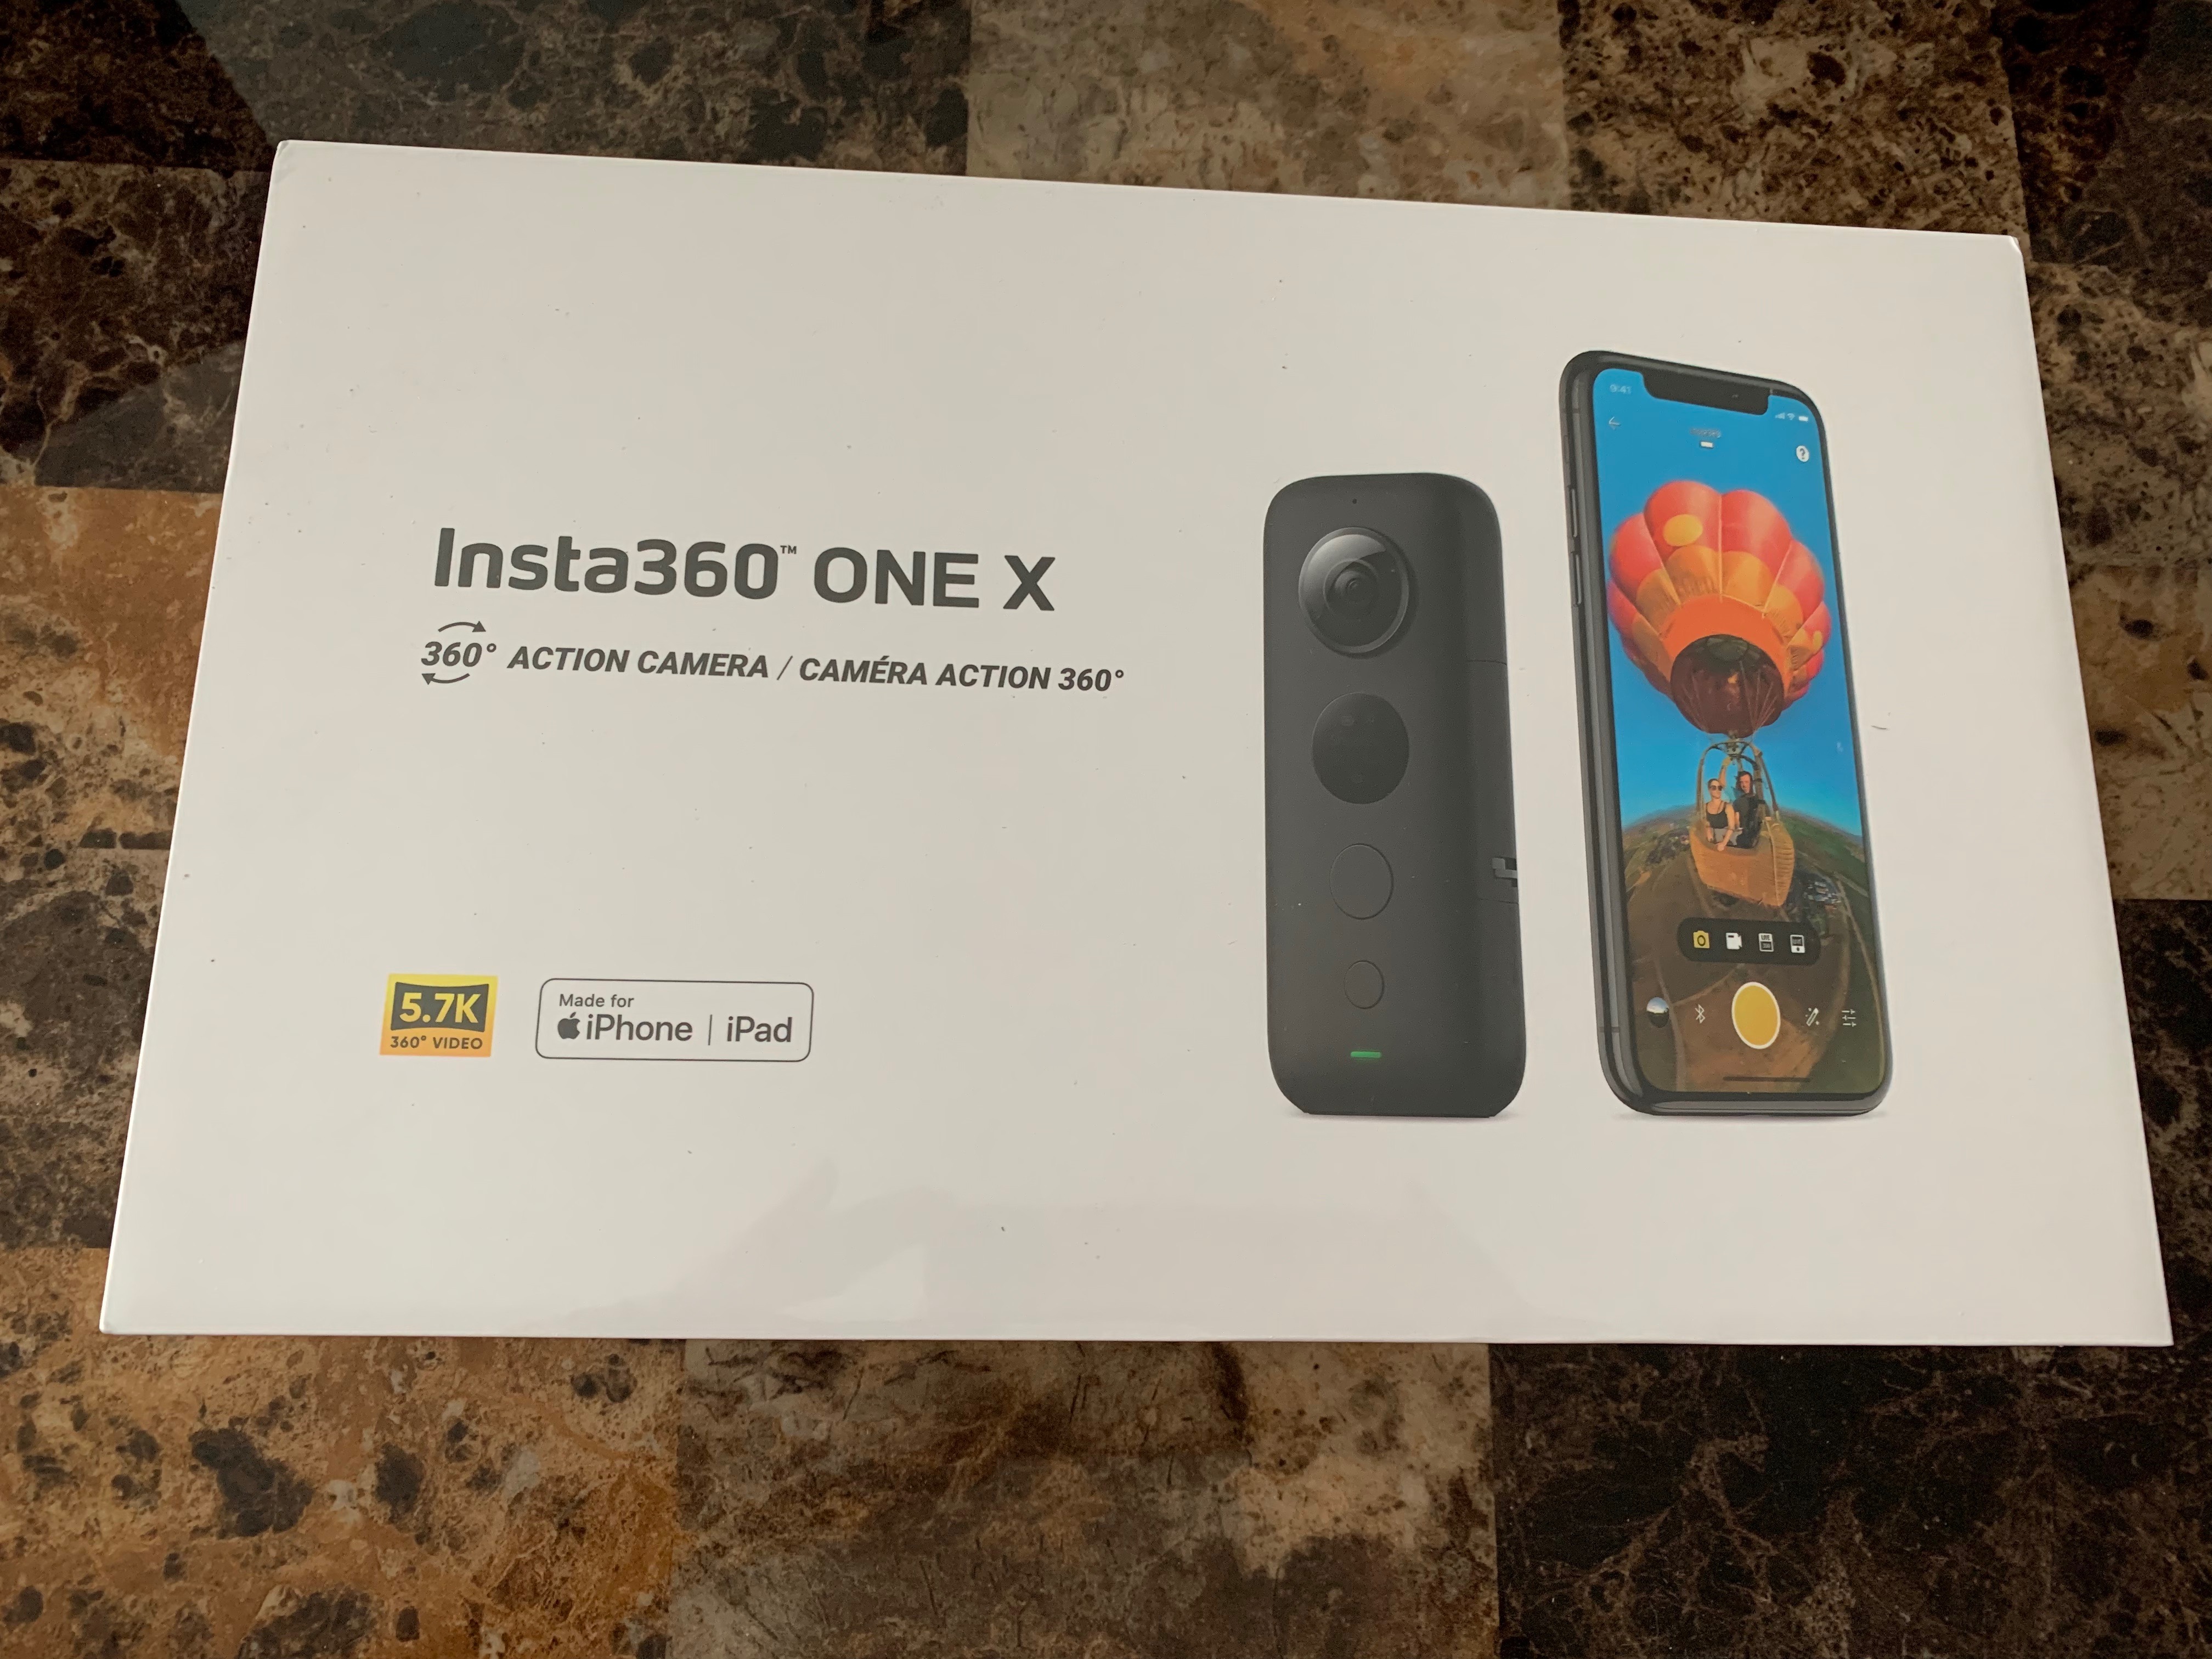 Unboxing an Insta ONE X Camera – Documentary Site